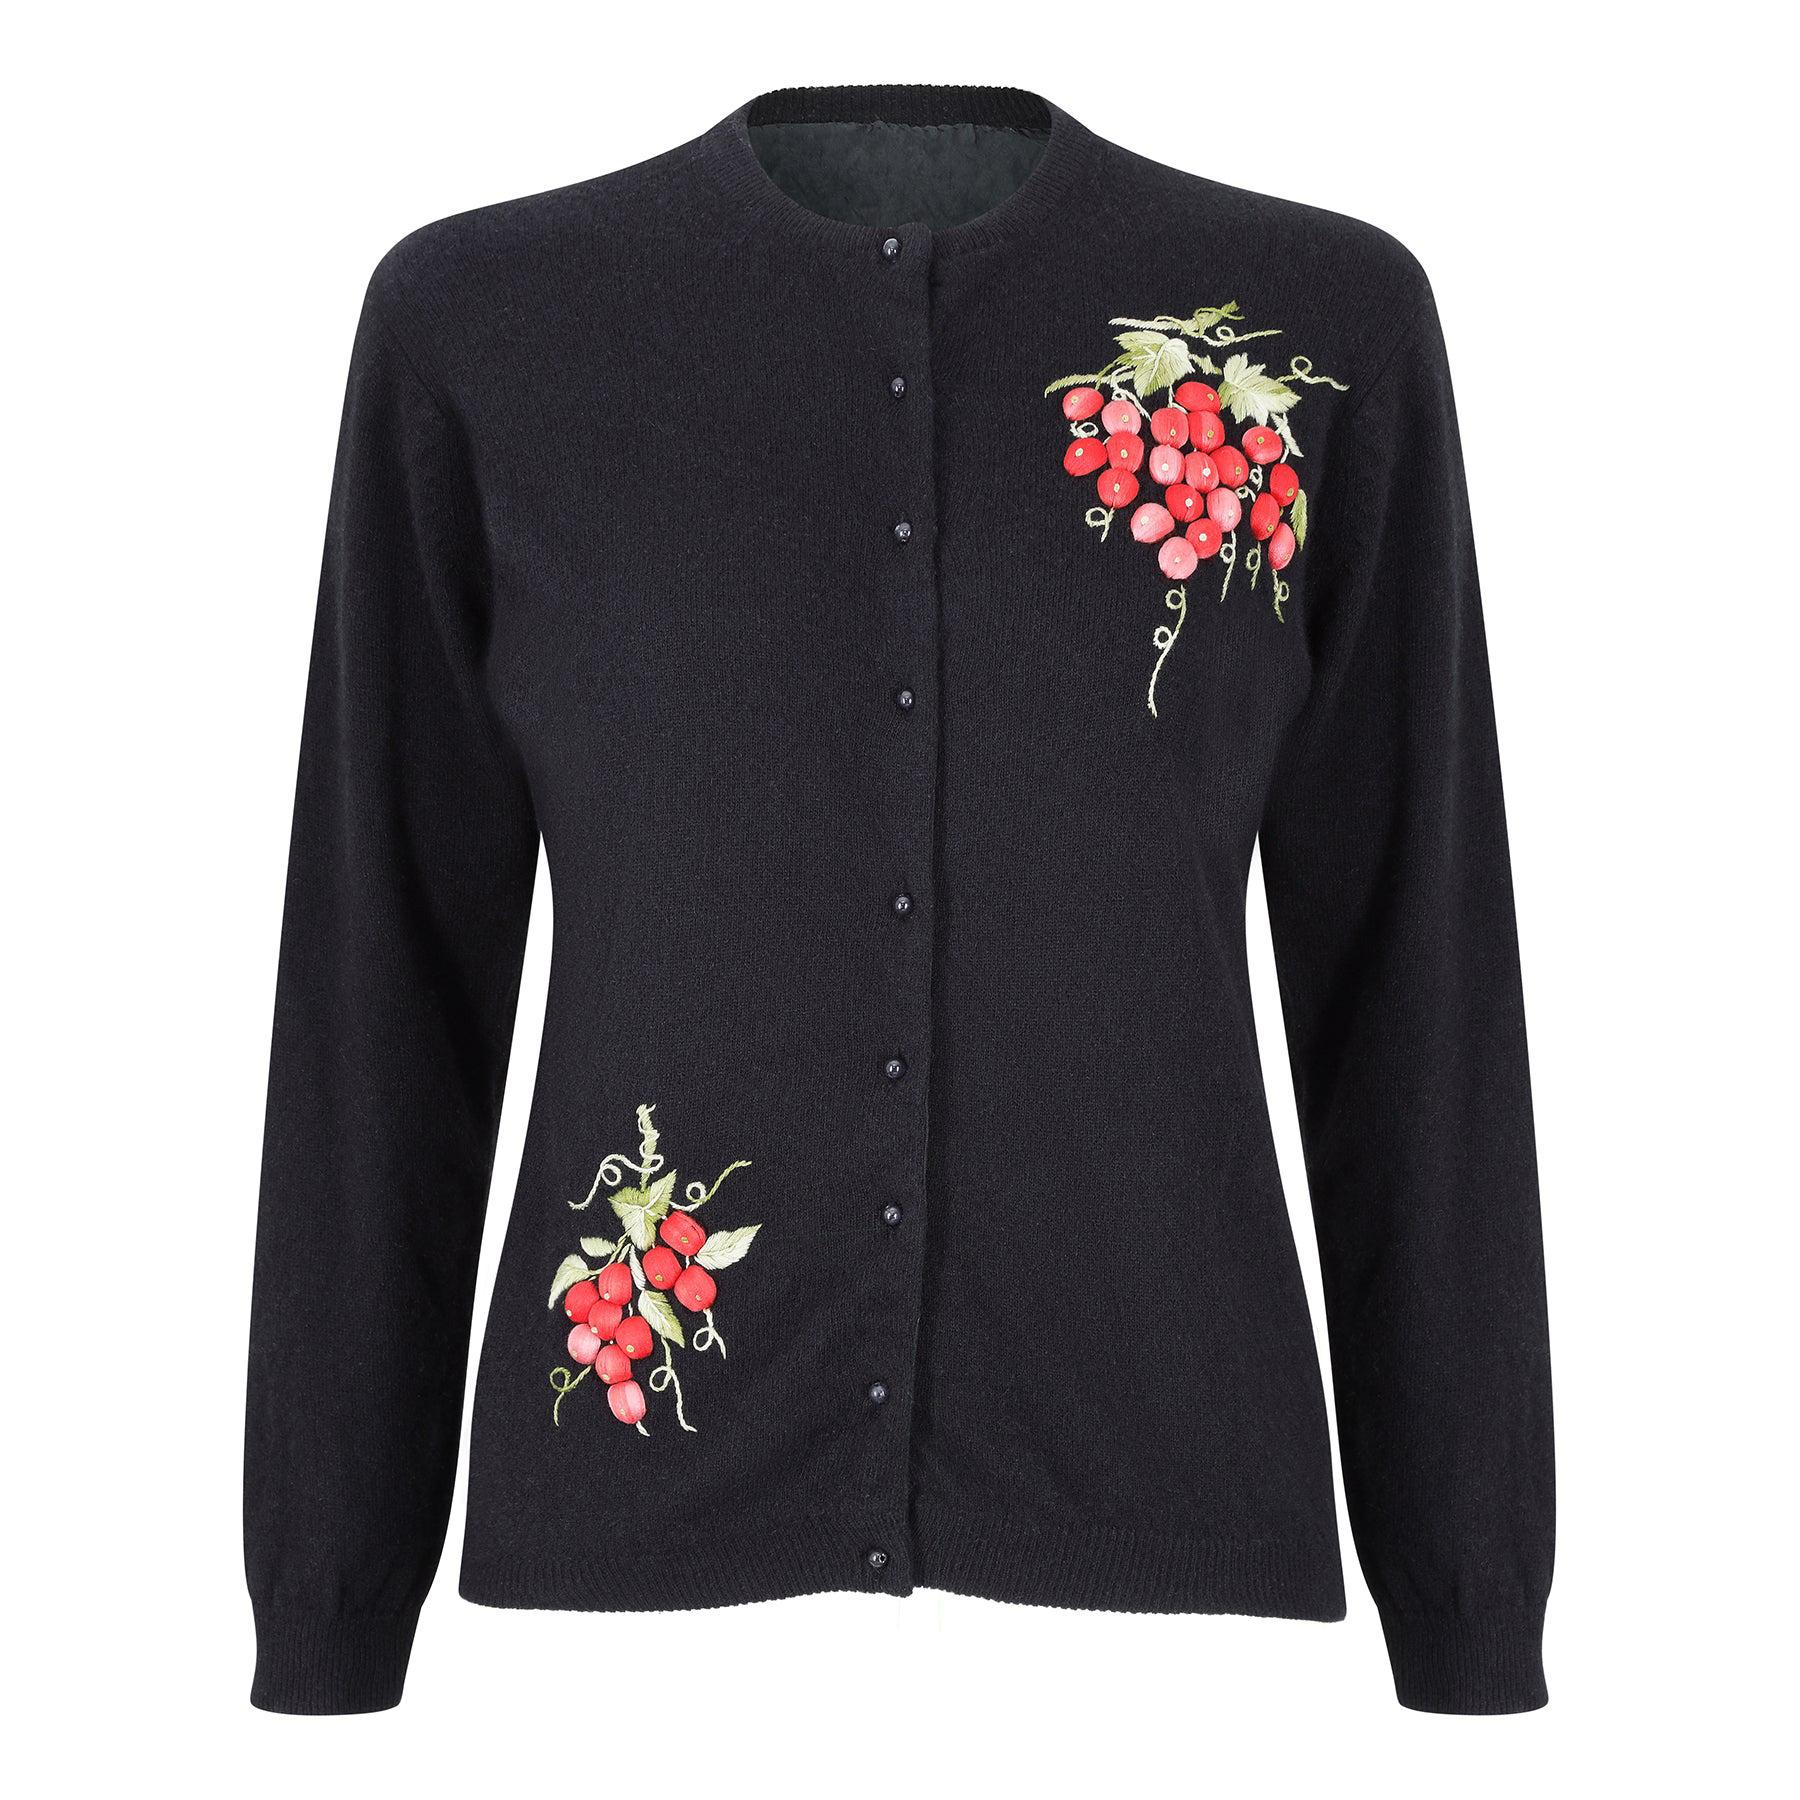 1980s Black Wool Cardigan with Raised Satin Stitch Grape Applique For Sale